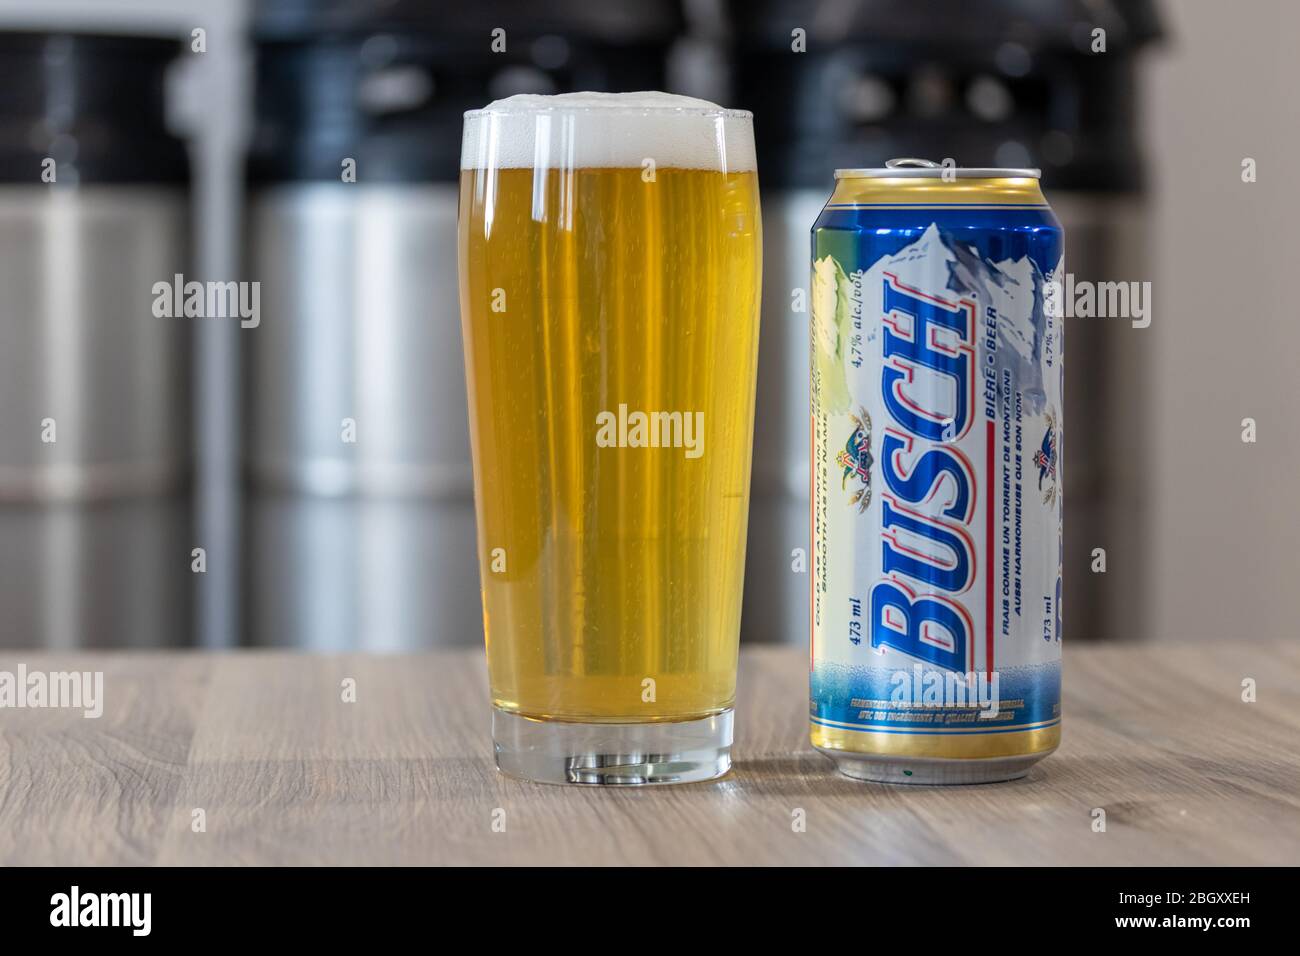 https://c8.alamy.com/comp/2BGXXEH/busch-beer-classic-can-on-a-table-beside-a-full-glass-of-beer-with-stacked-kegs-in-the-background-2BGXXEH.jpg